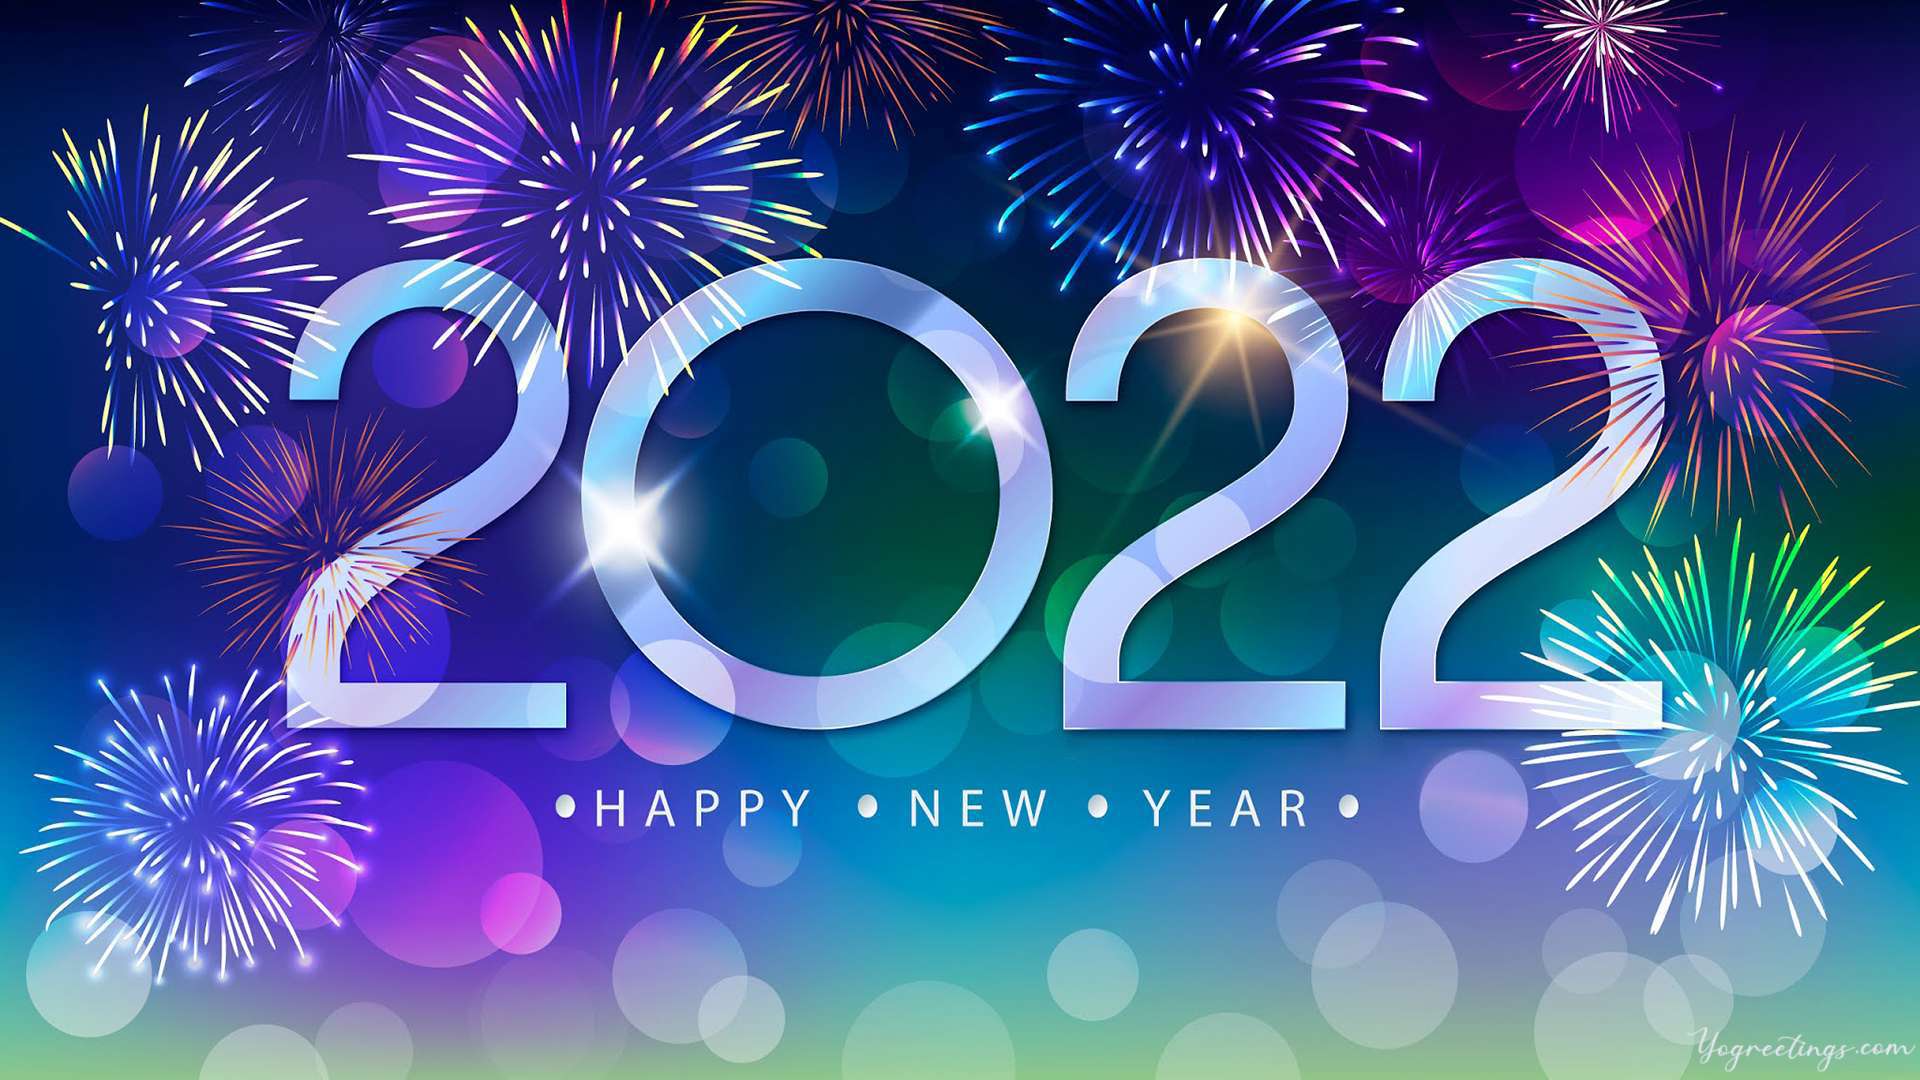 Free download happy new year 2022 wallpaper with fireworks